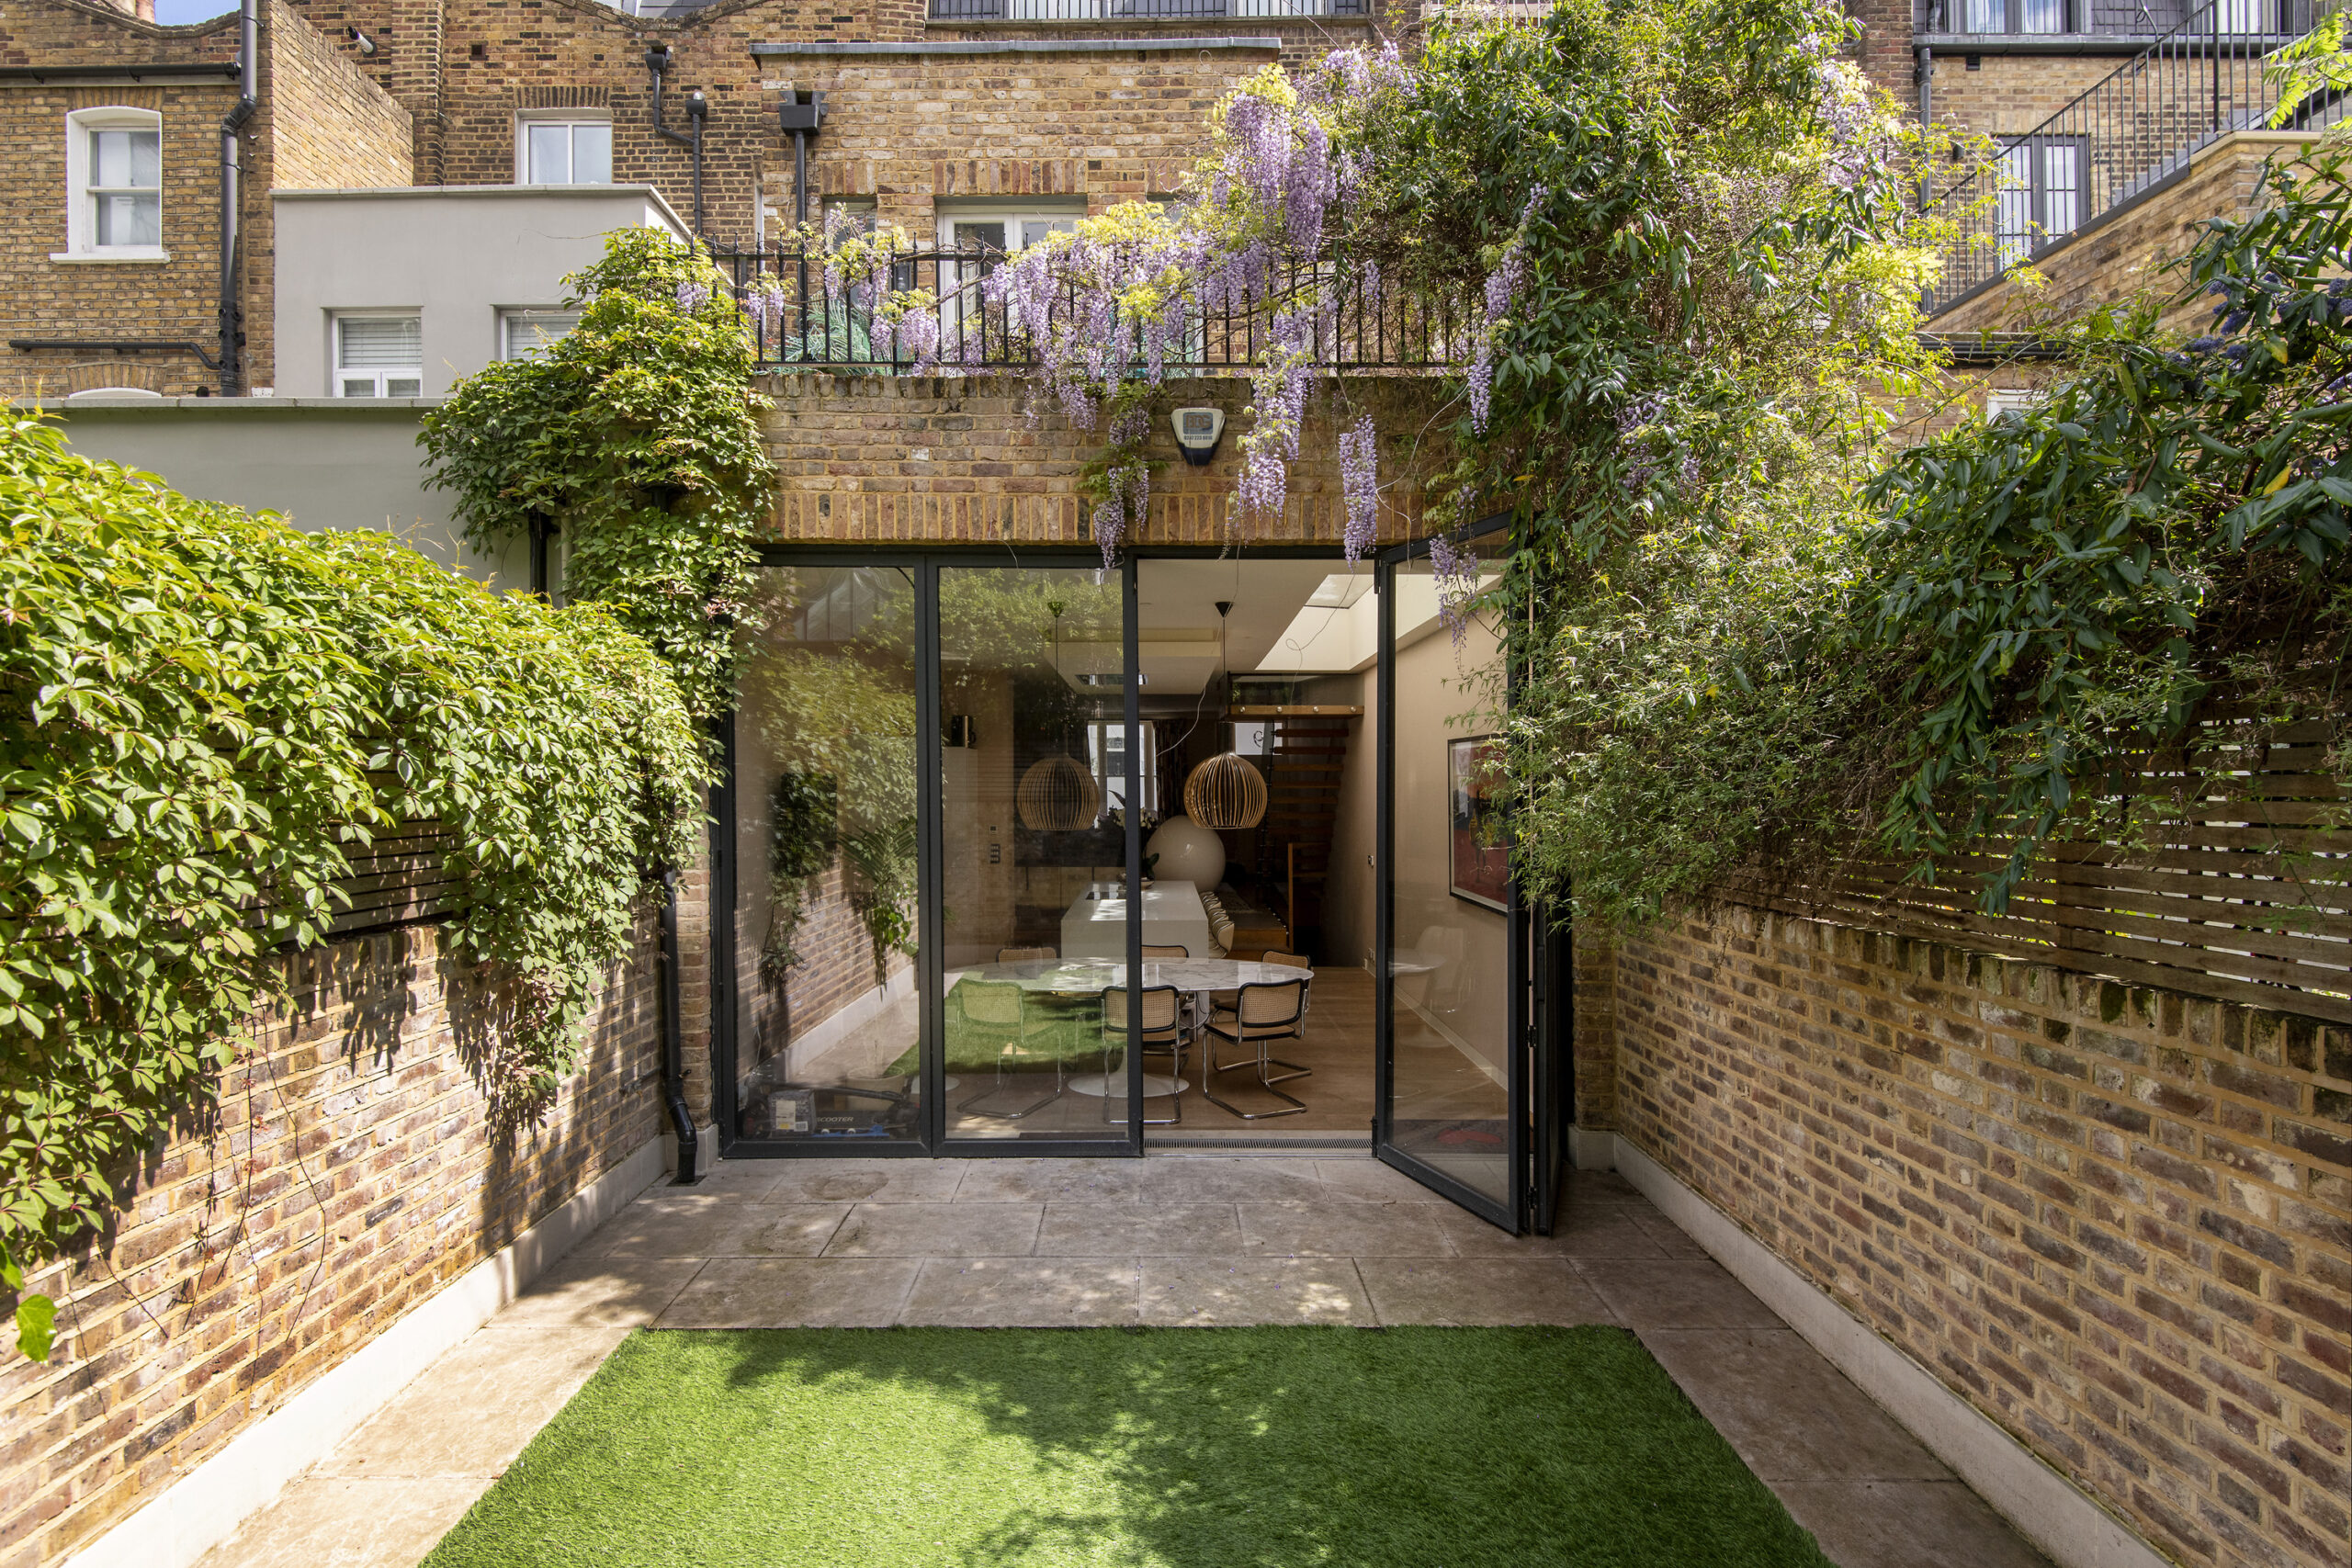 Enclosed private garden of a four-bedroom Notting Hill townhouse for sale.